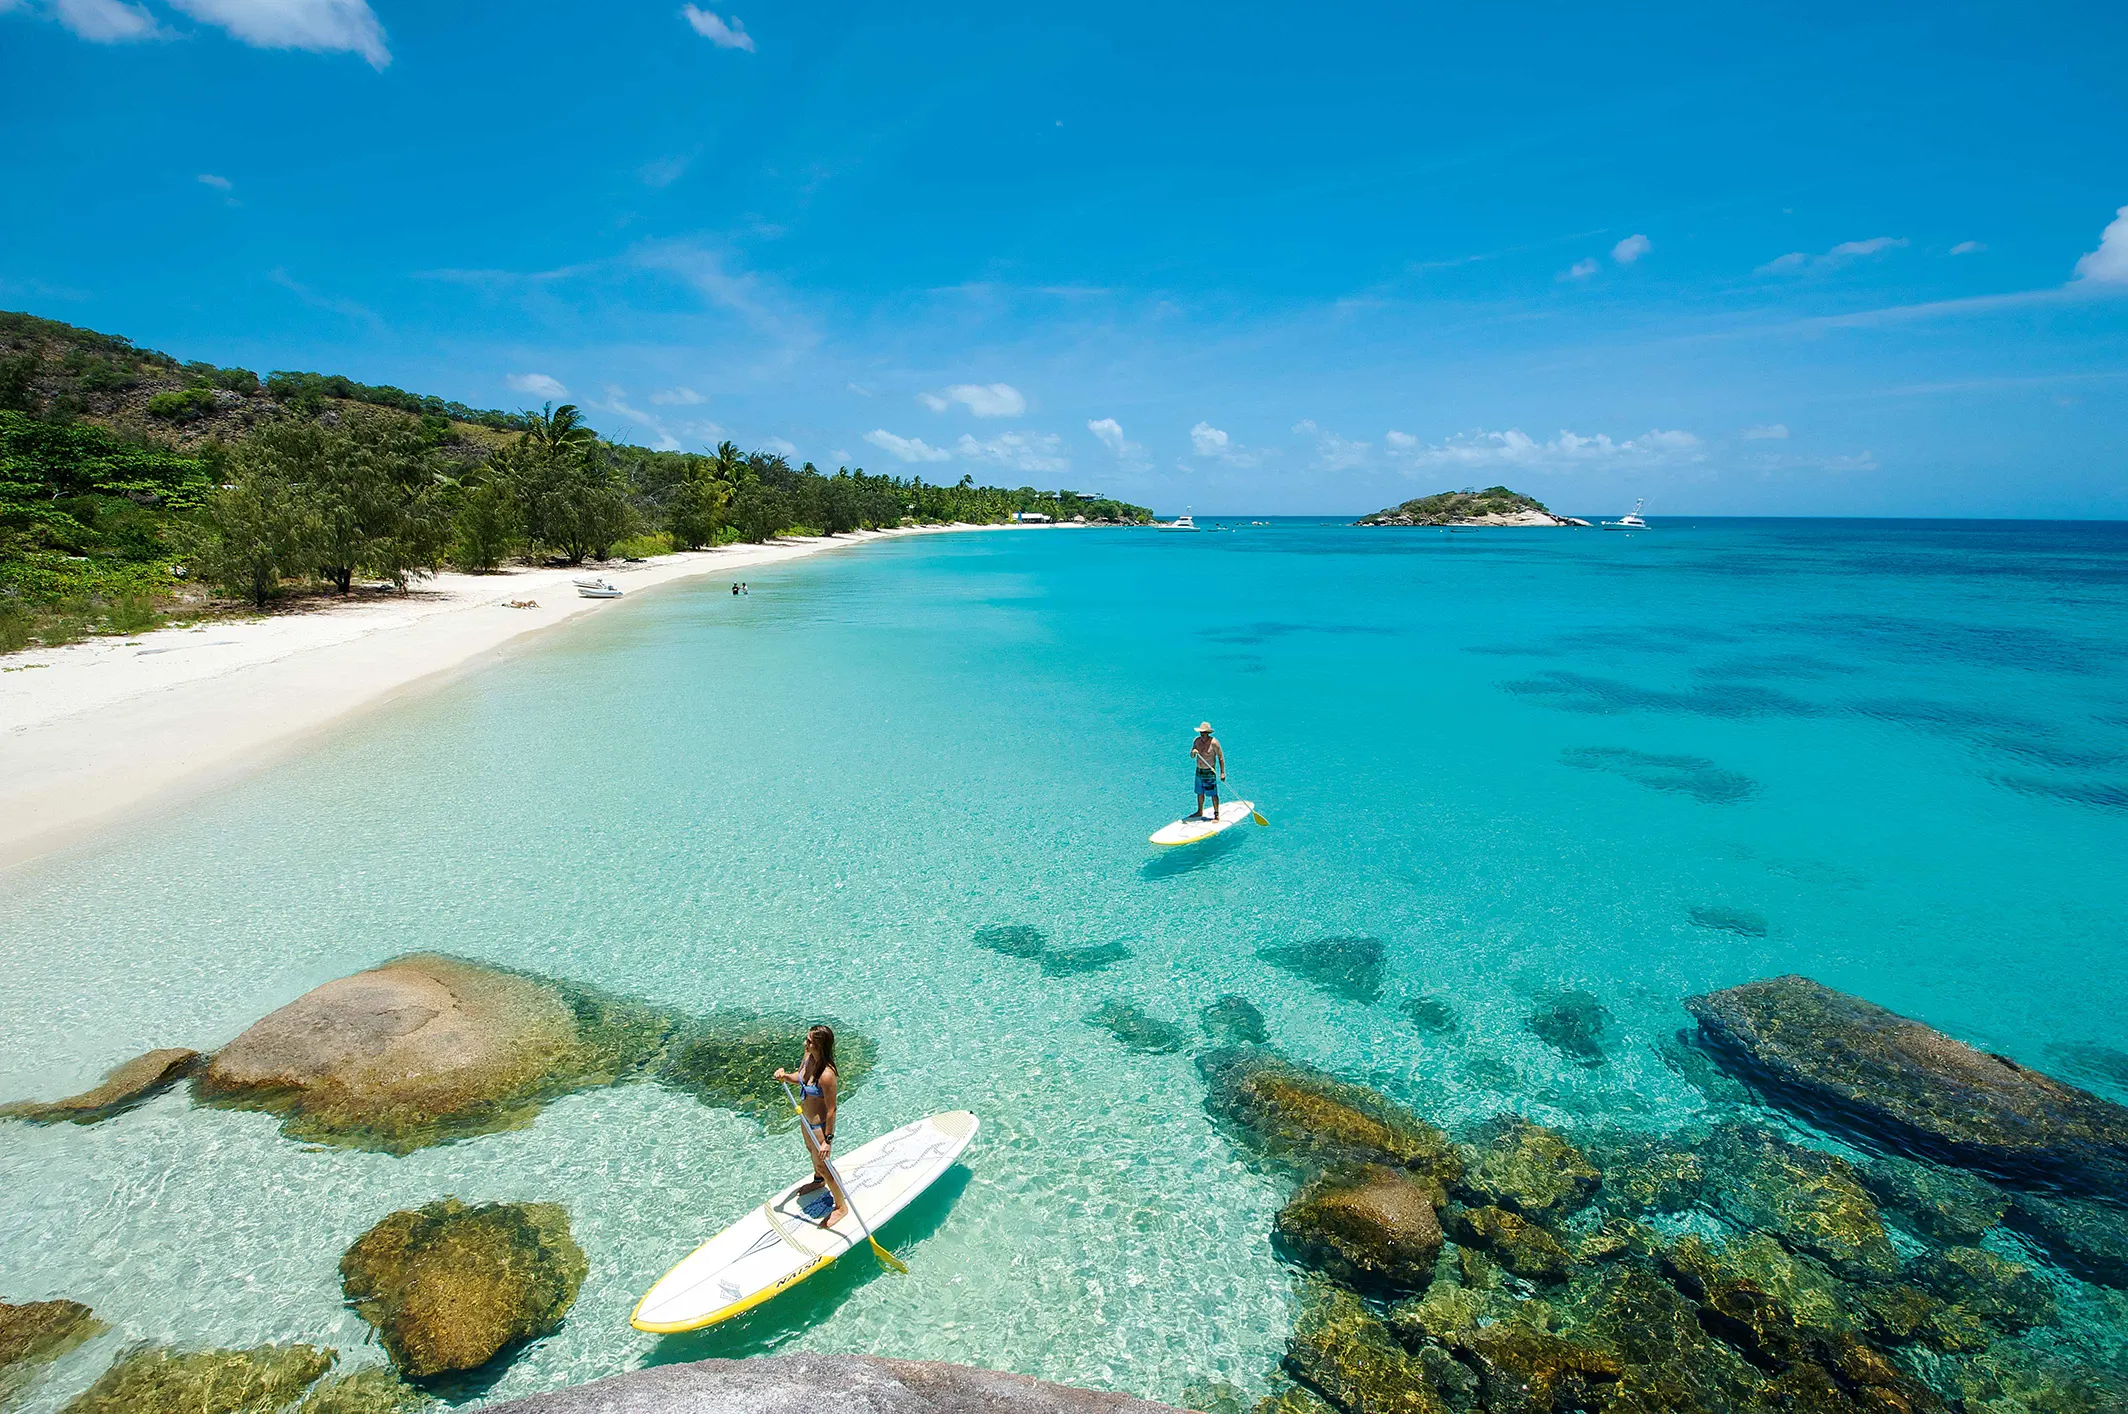 Two people on stand-up-paddleboards at Lizard Island.